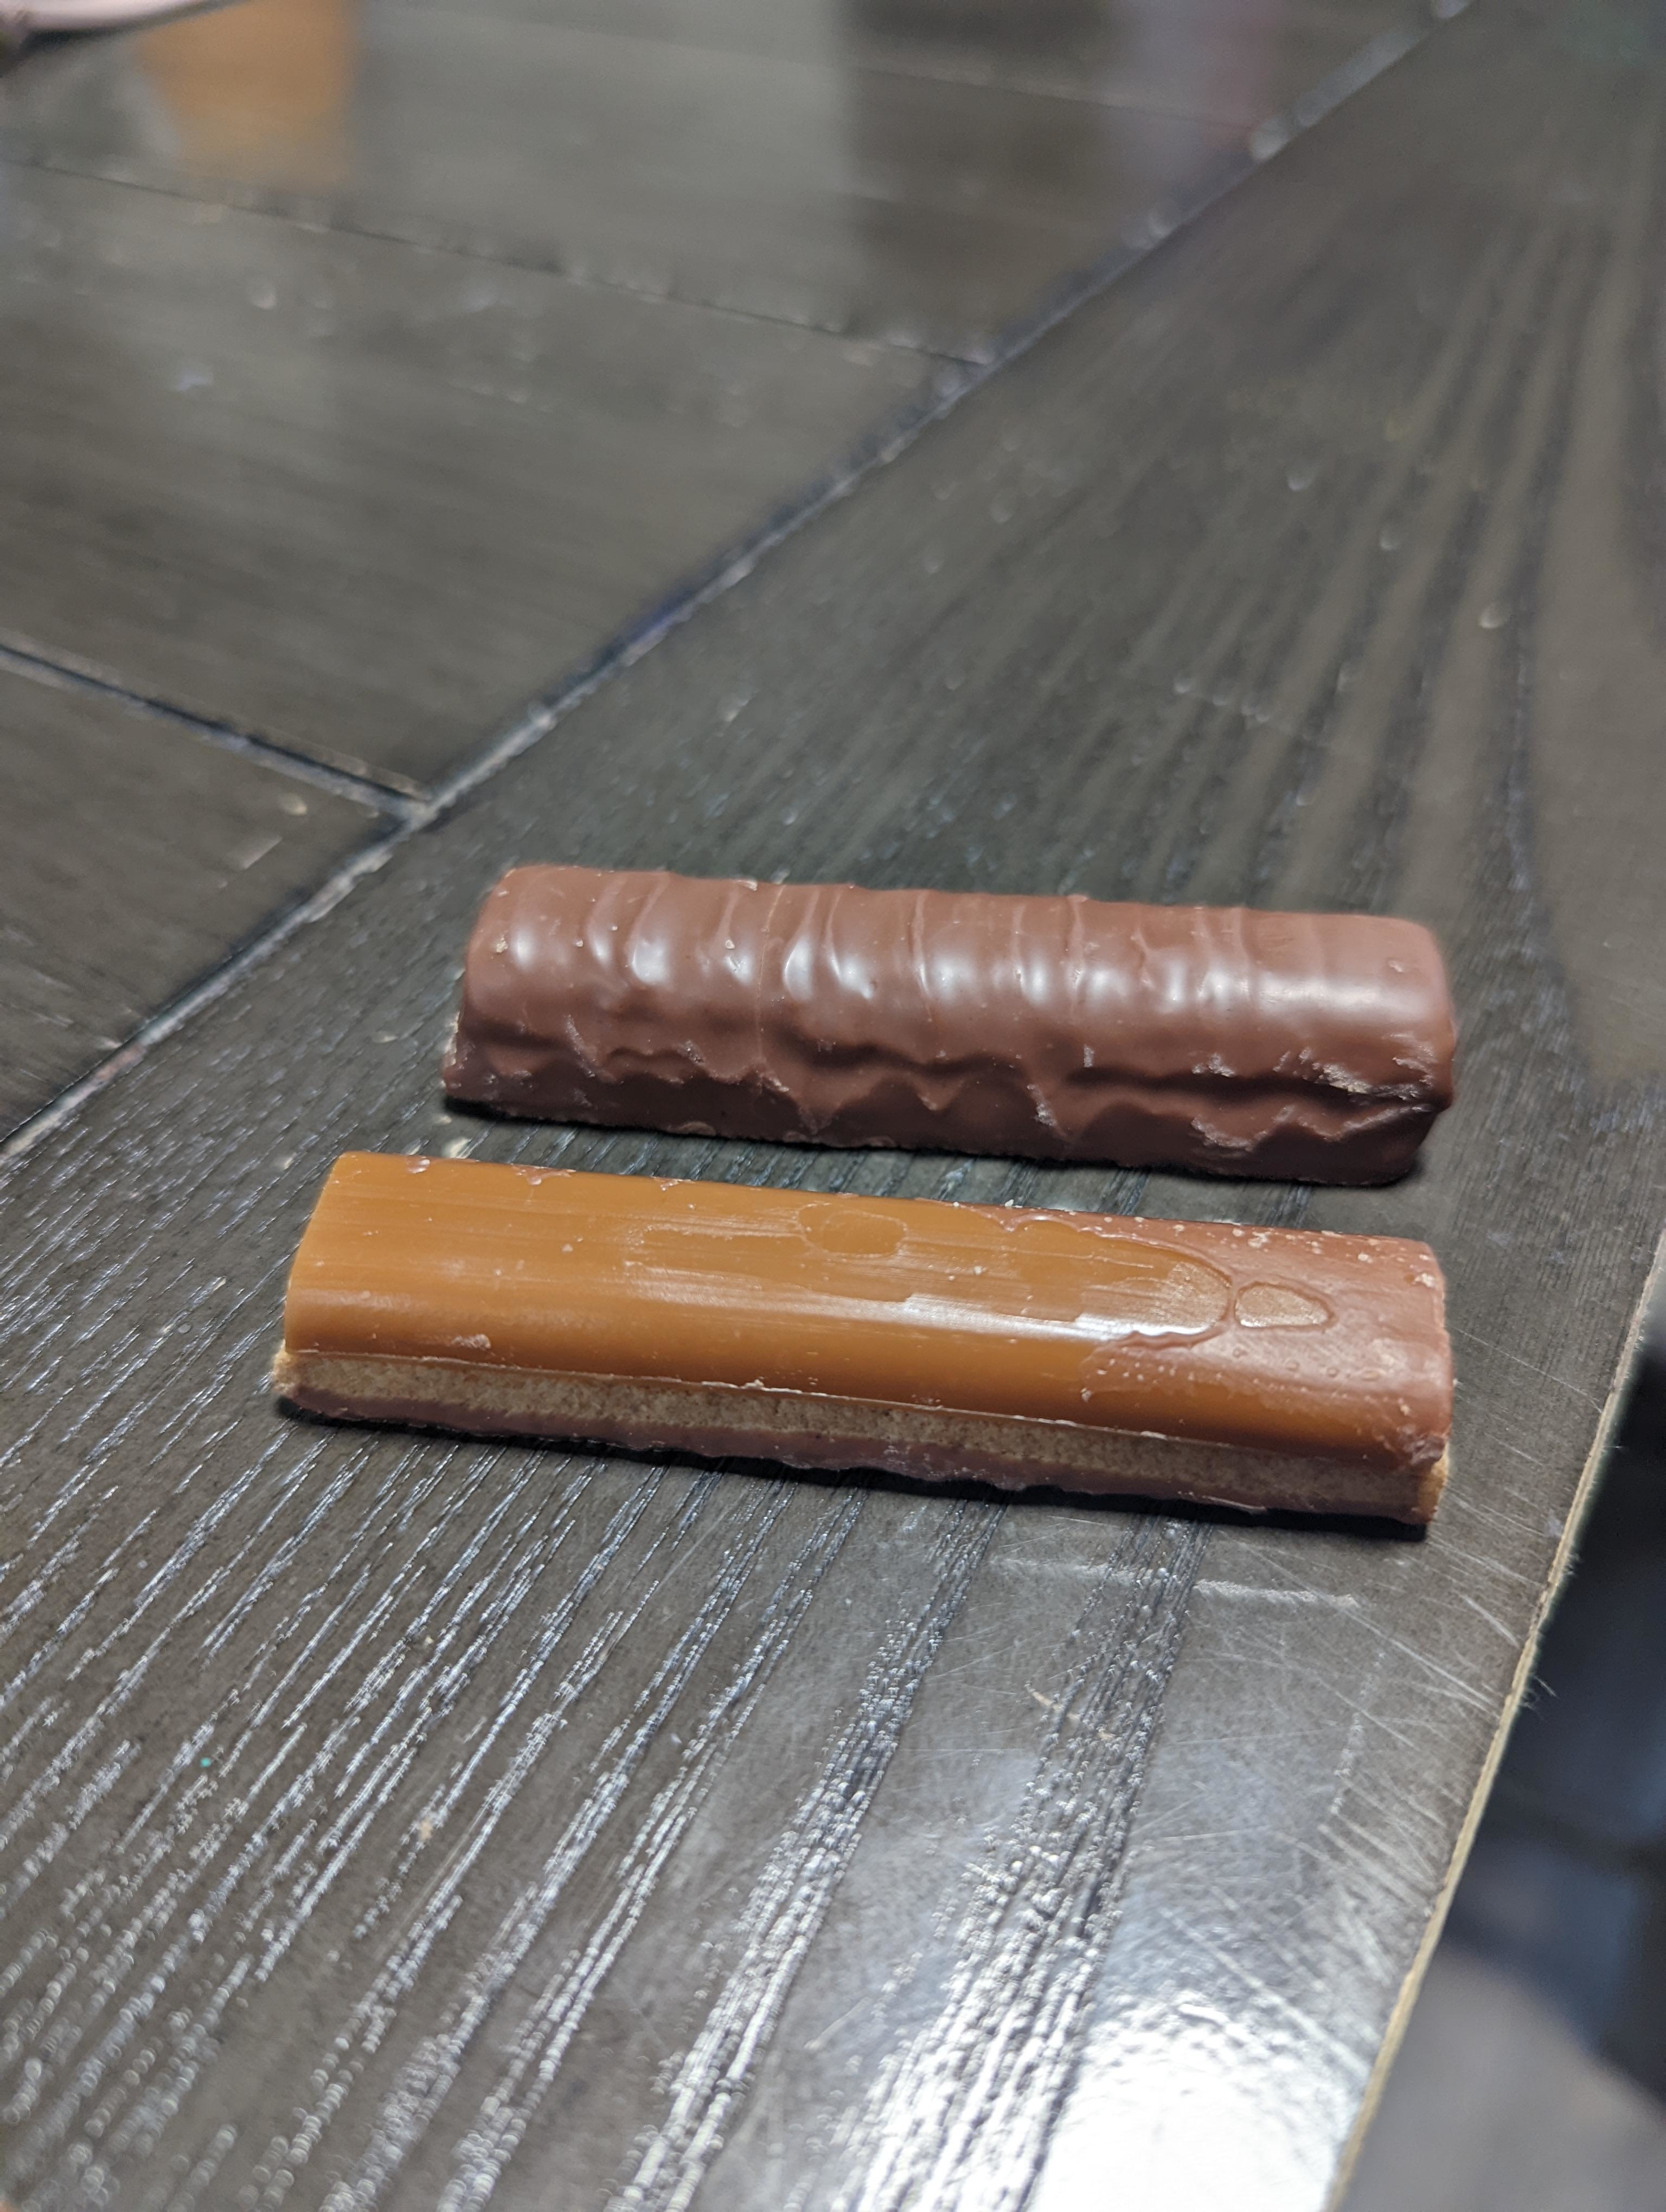 A Twix with the chocolate topping and one just with caramel